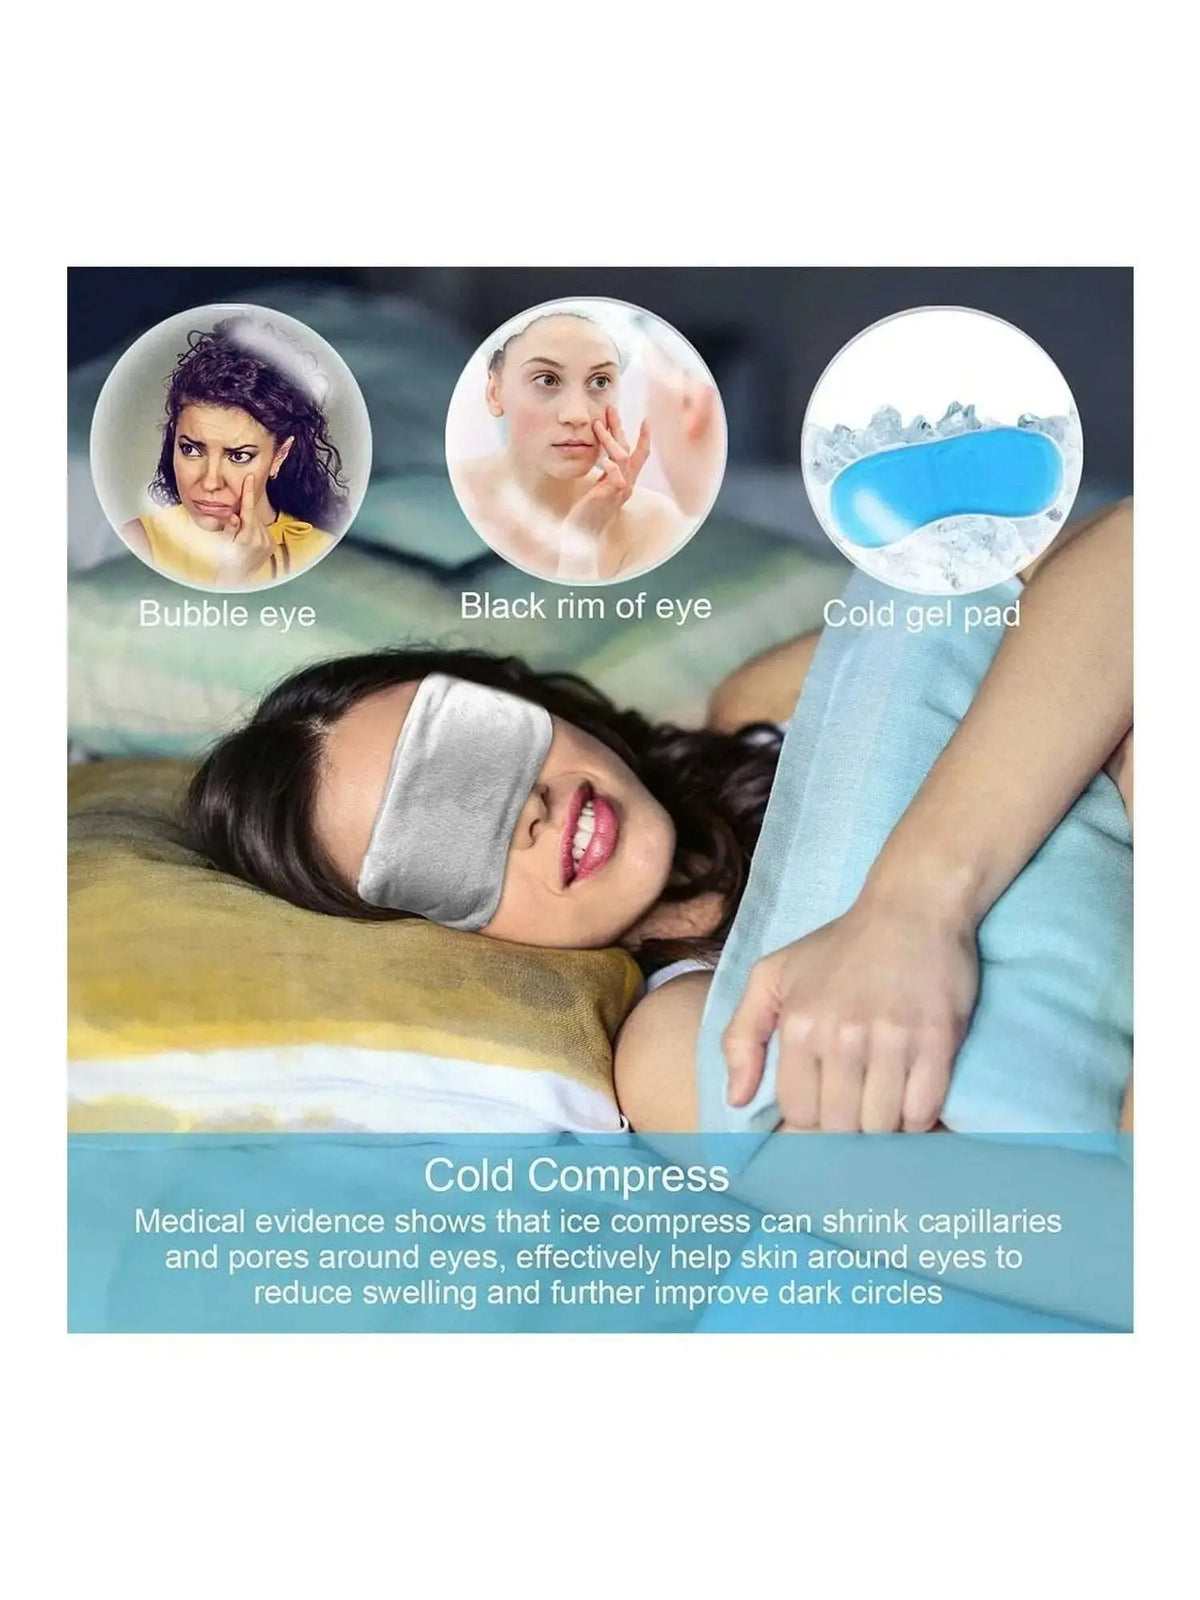 Heated Eye Mask Cold Compress features